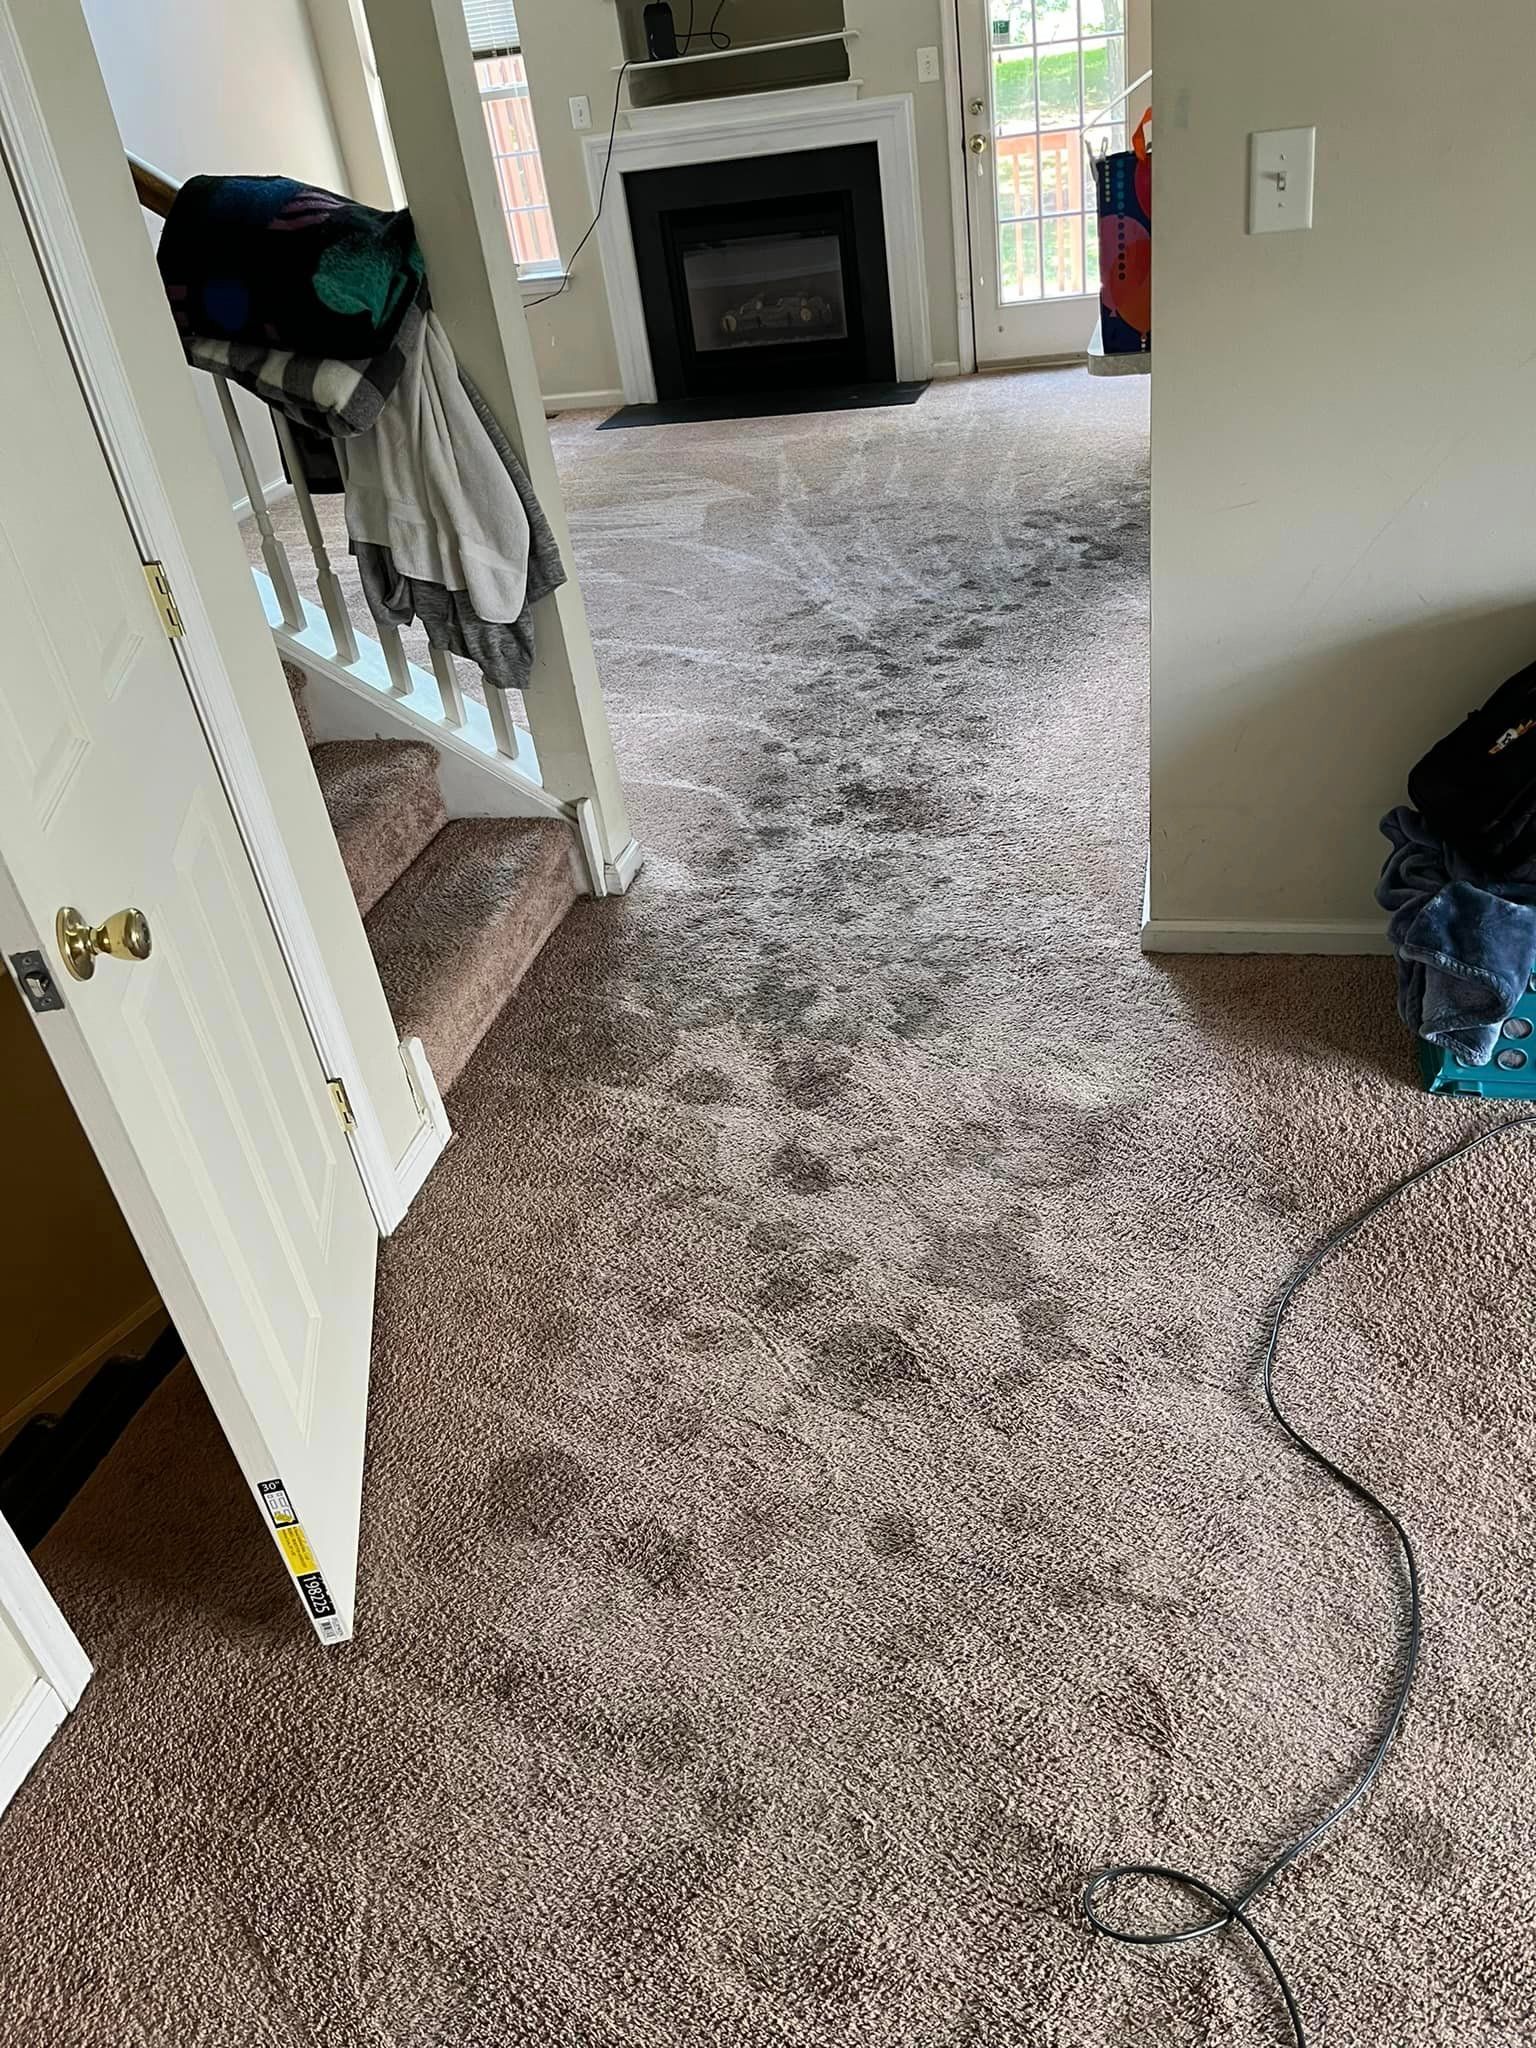 Carpet with Dirt